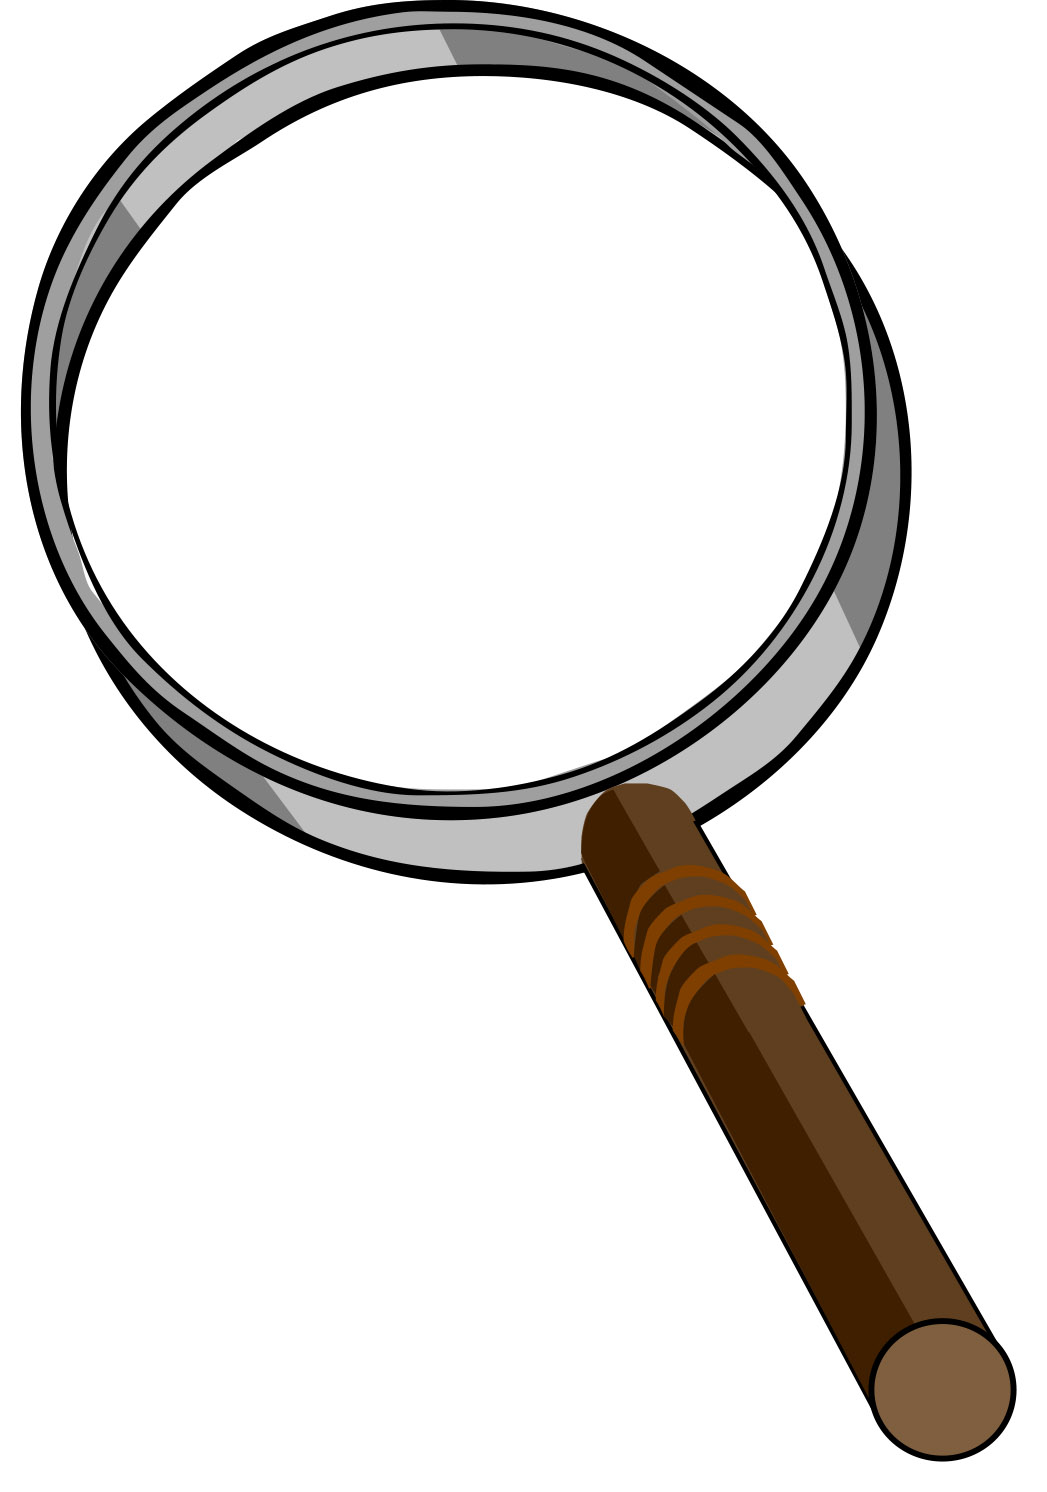 Magnifying Glass Clipart Blac - Clip Art Magnifying Glass